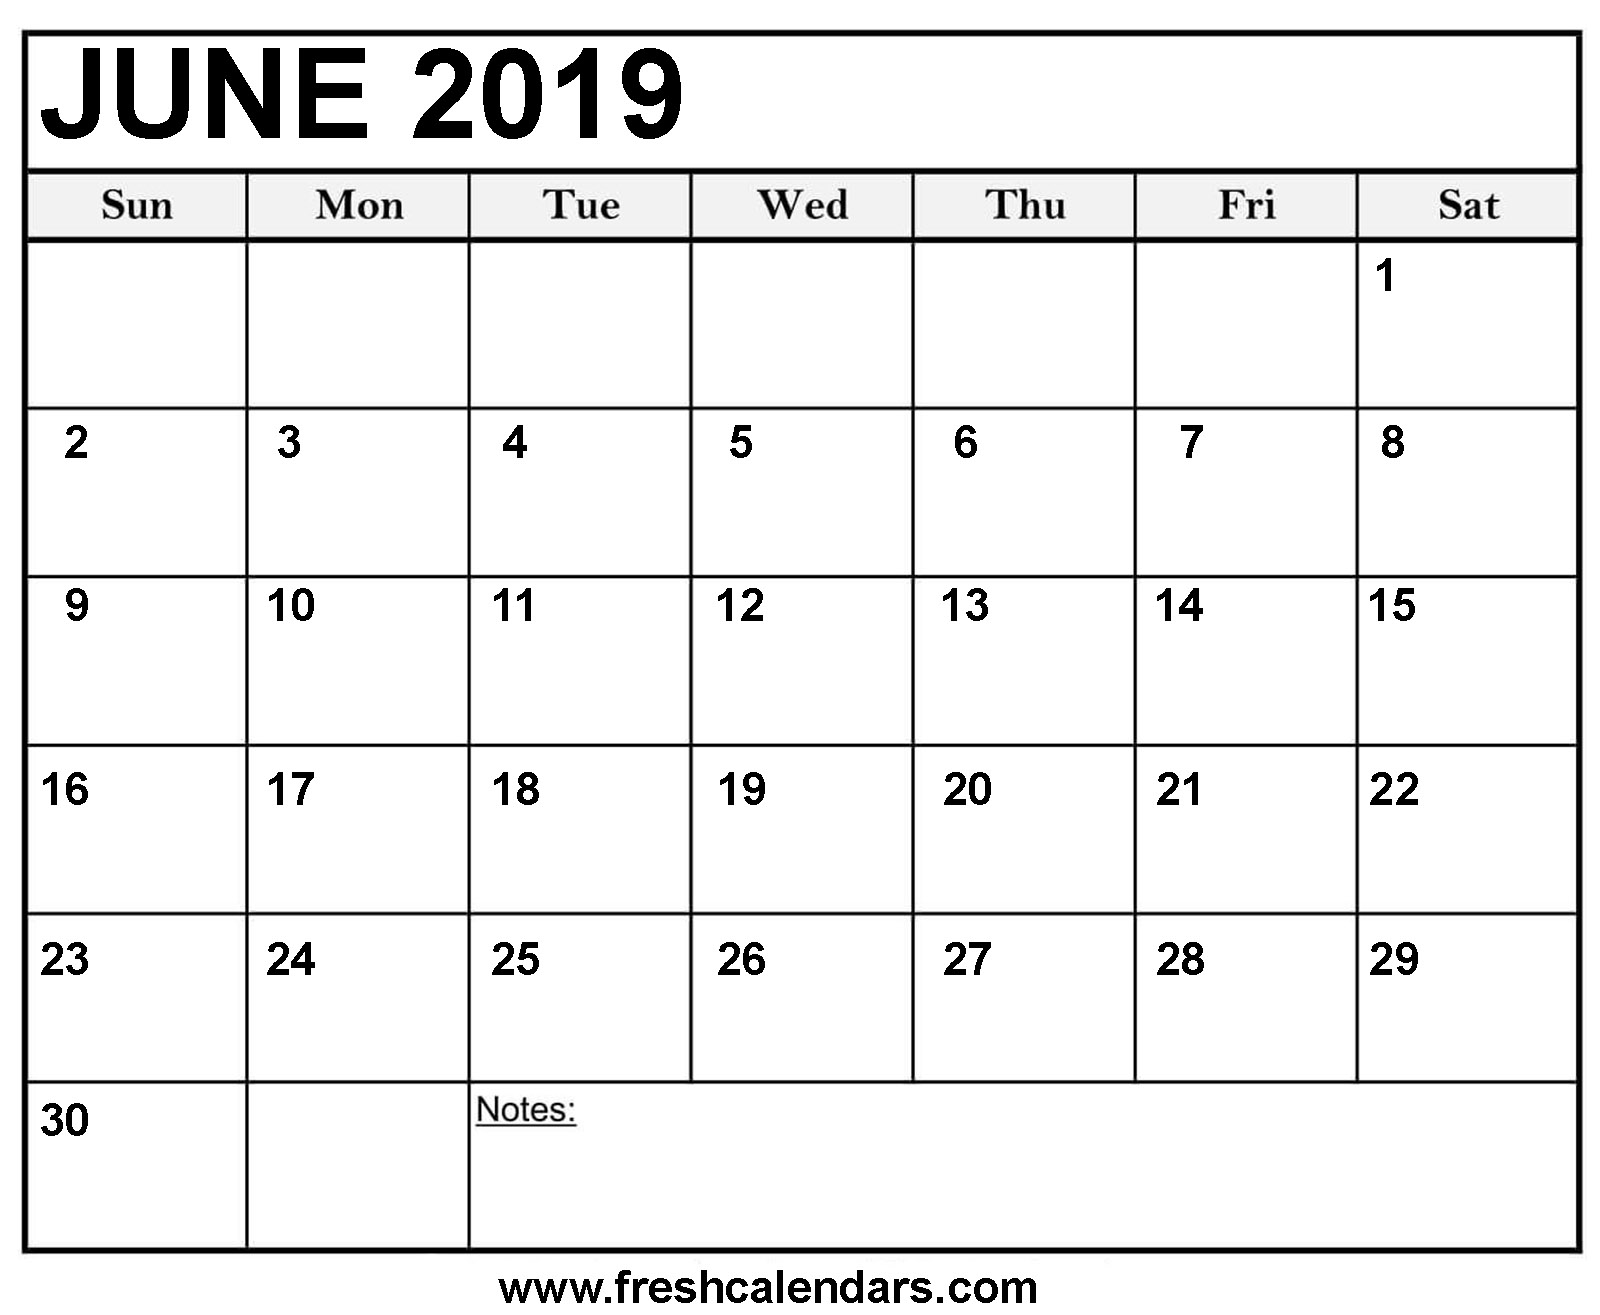 June 2019 Calendar with Note Spaces